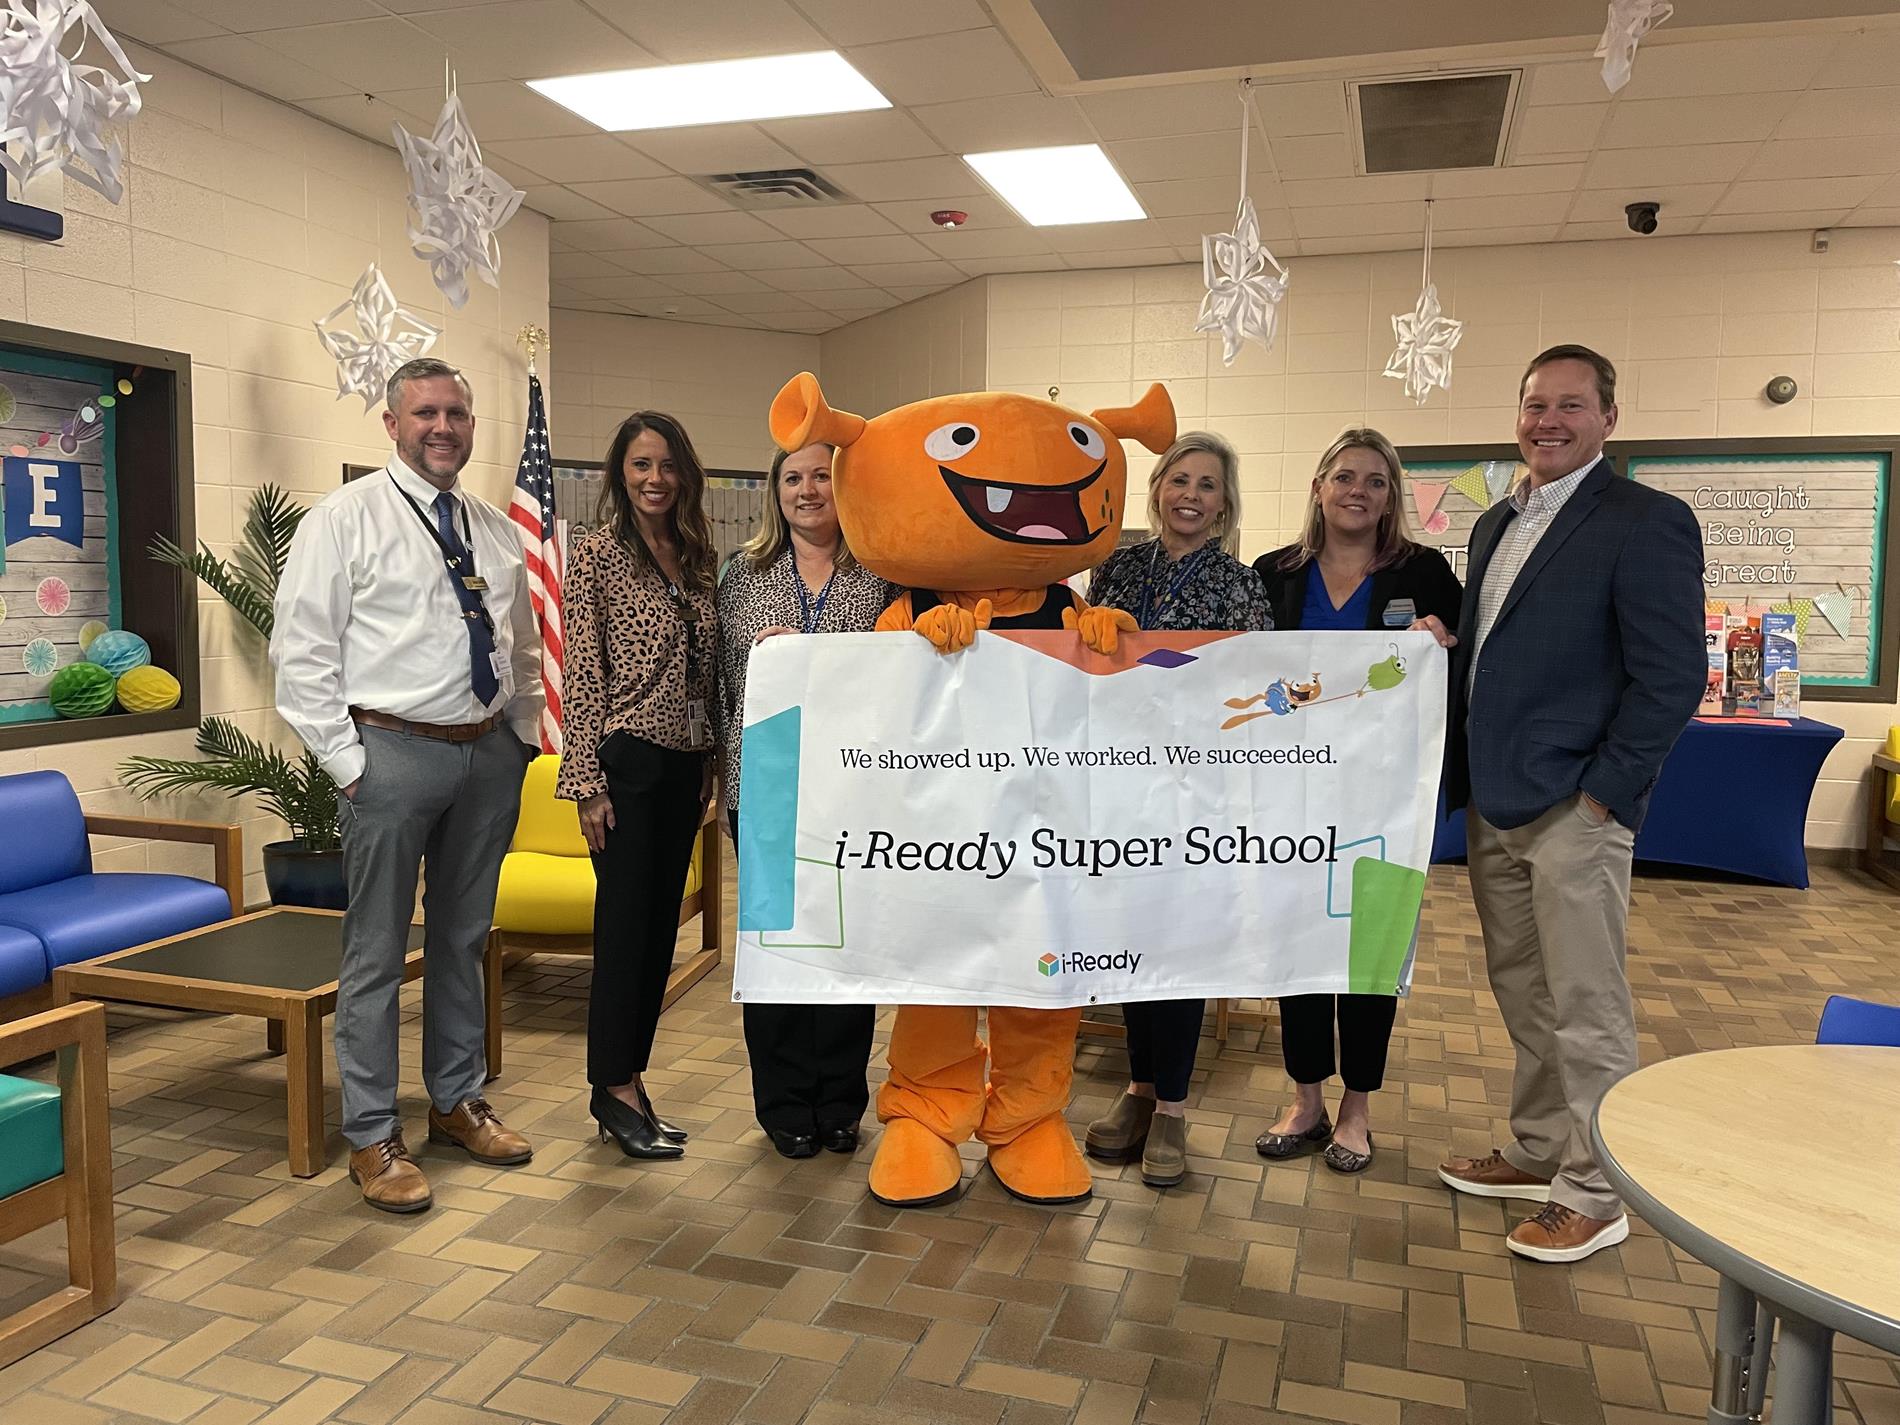 W.S. Neal Elementary becomes an iReady Super School